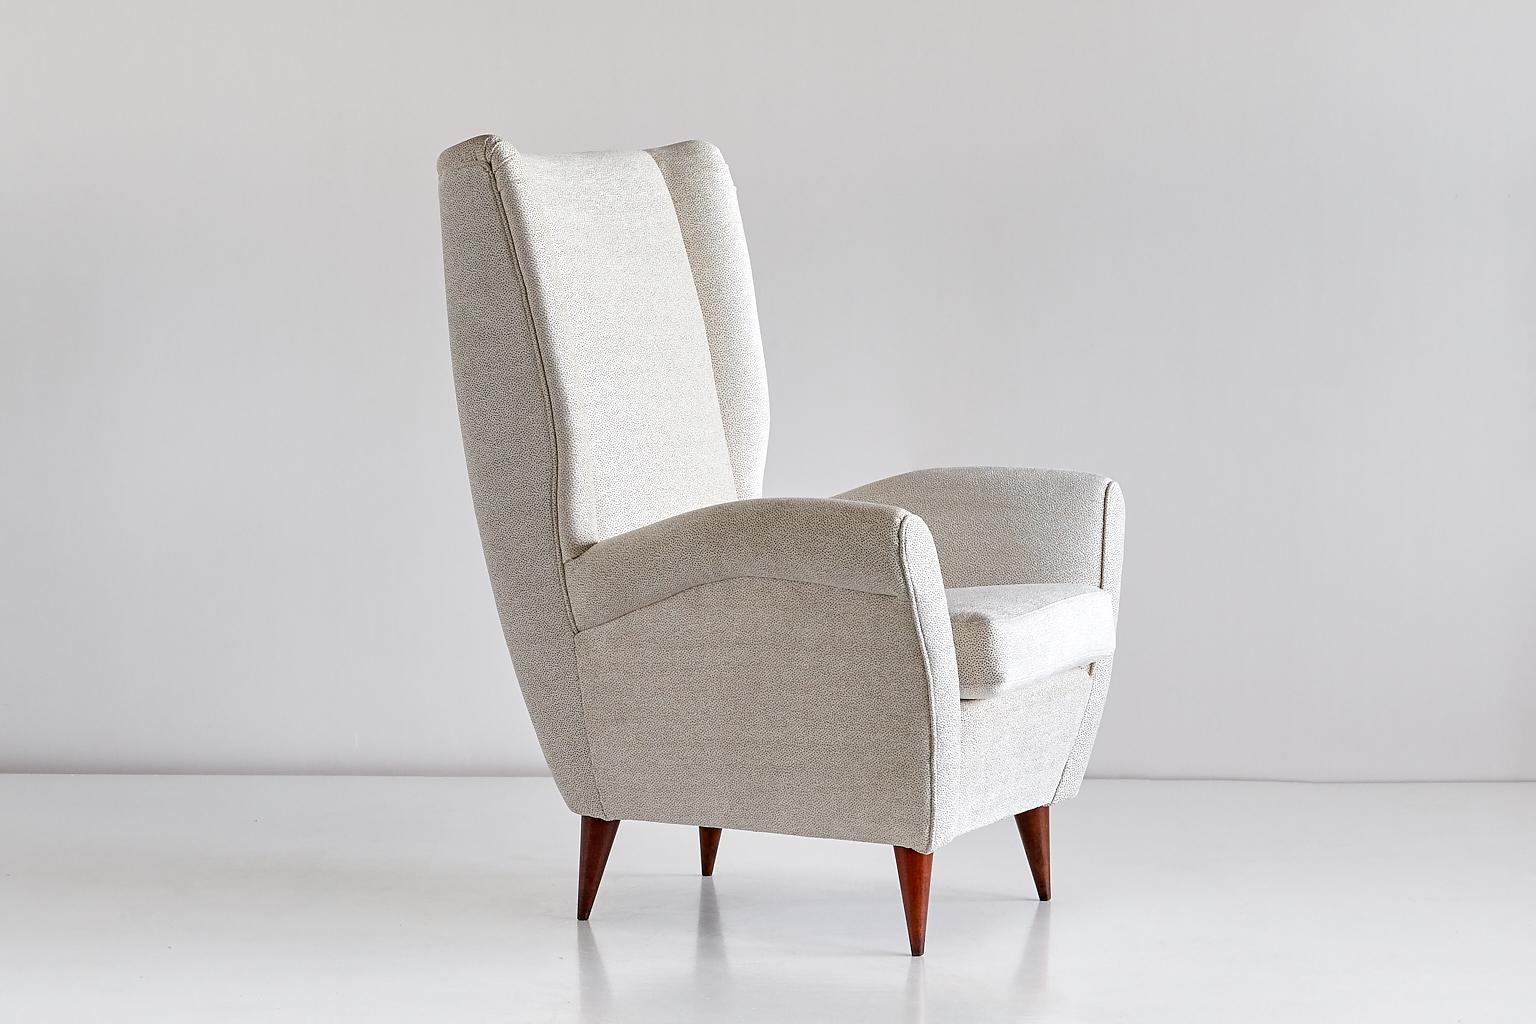 This high back armchair was designed by Gio Ponti for a private commission in the late 1940s. The chair is characterized by its strikingly modern lines, elegantly tapered walnut legs and generous proportions. 
The comfortable armchair has been